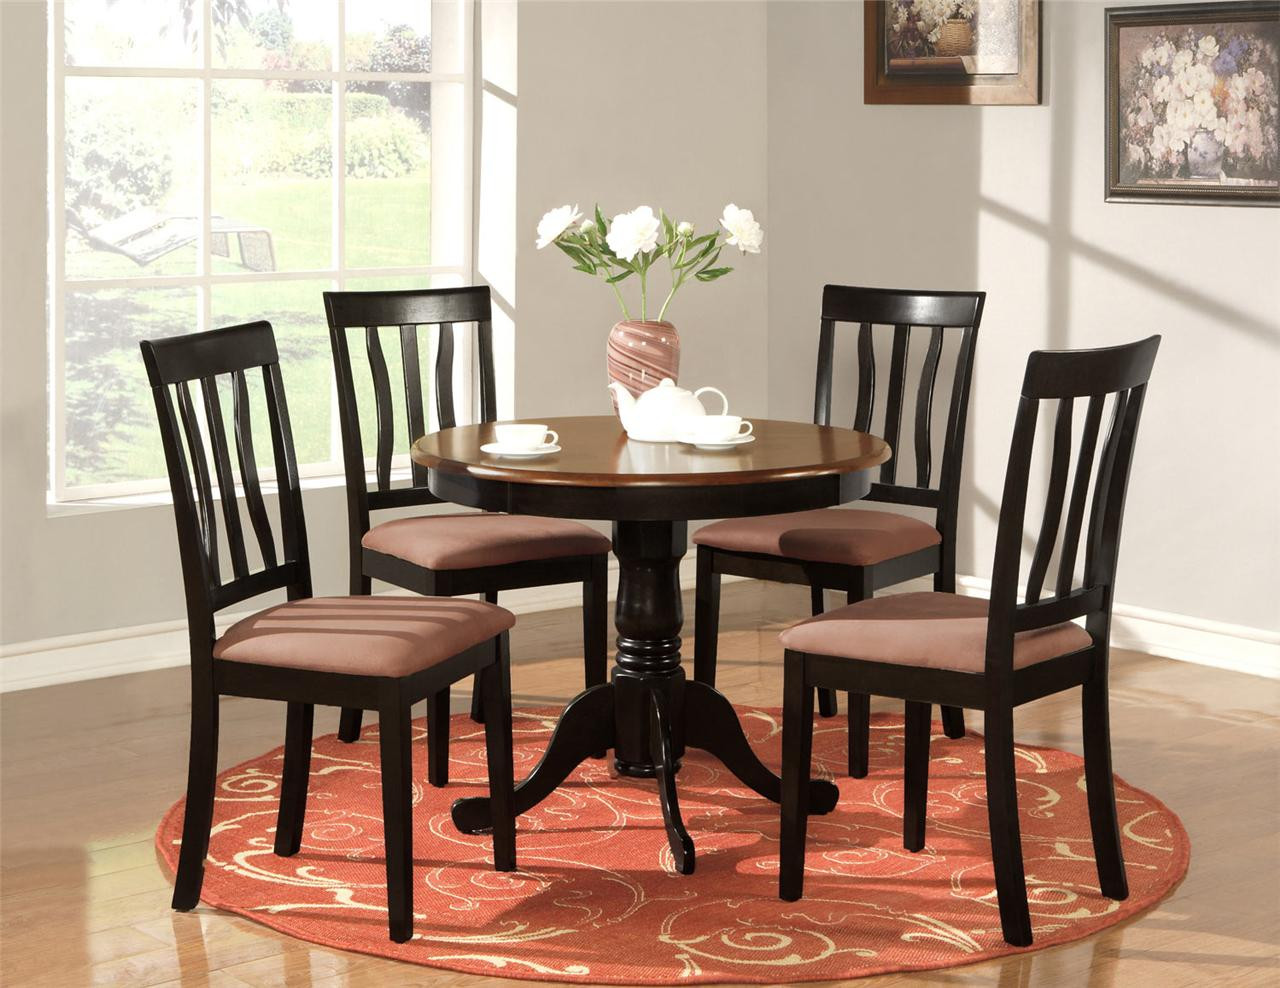 Small Kitchen Table For 4
 5 PC ROUND TABLE DINETTE KITCHEN TABLE & 4 CHAIRS OAK